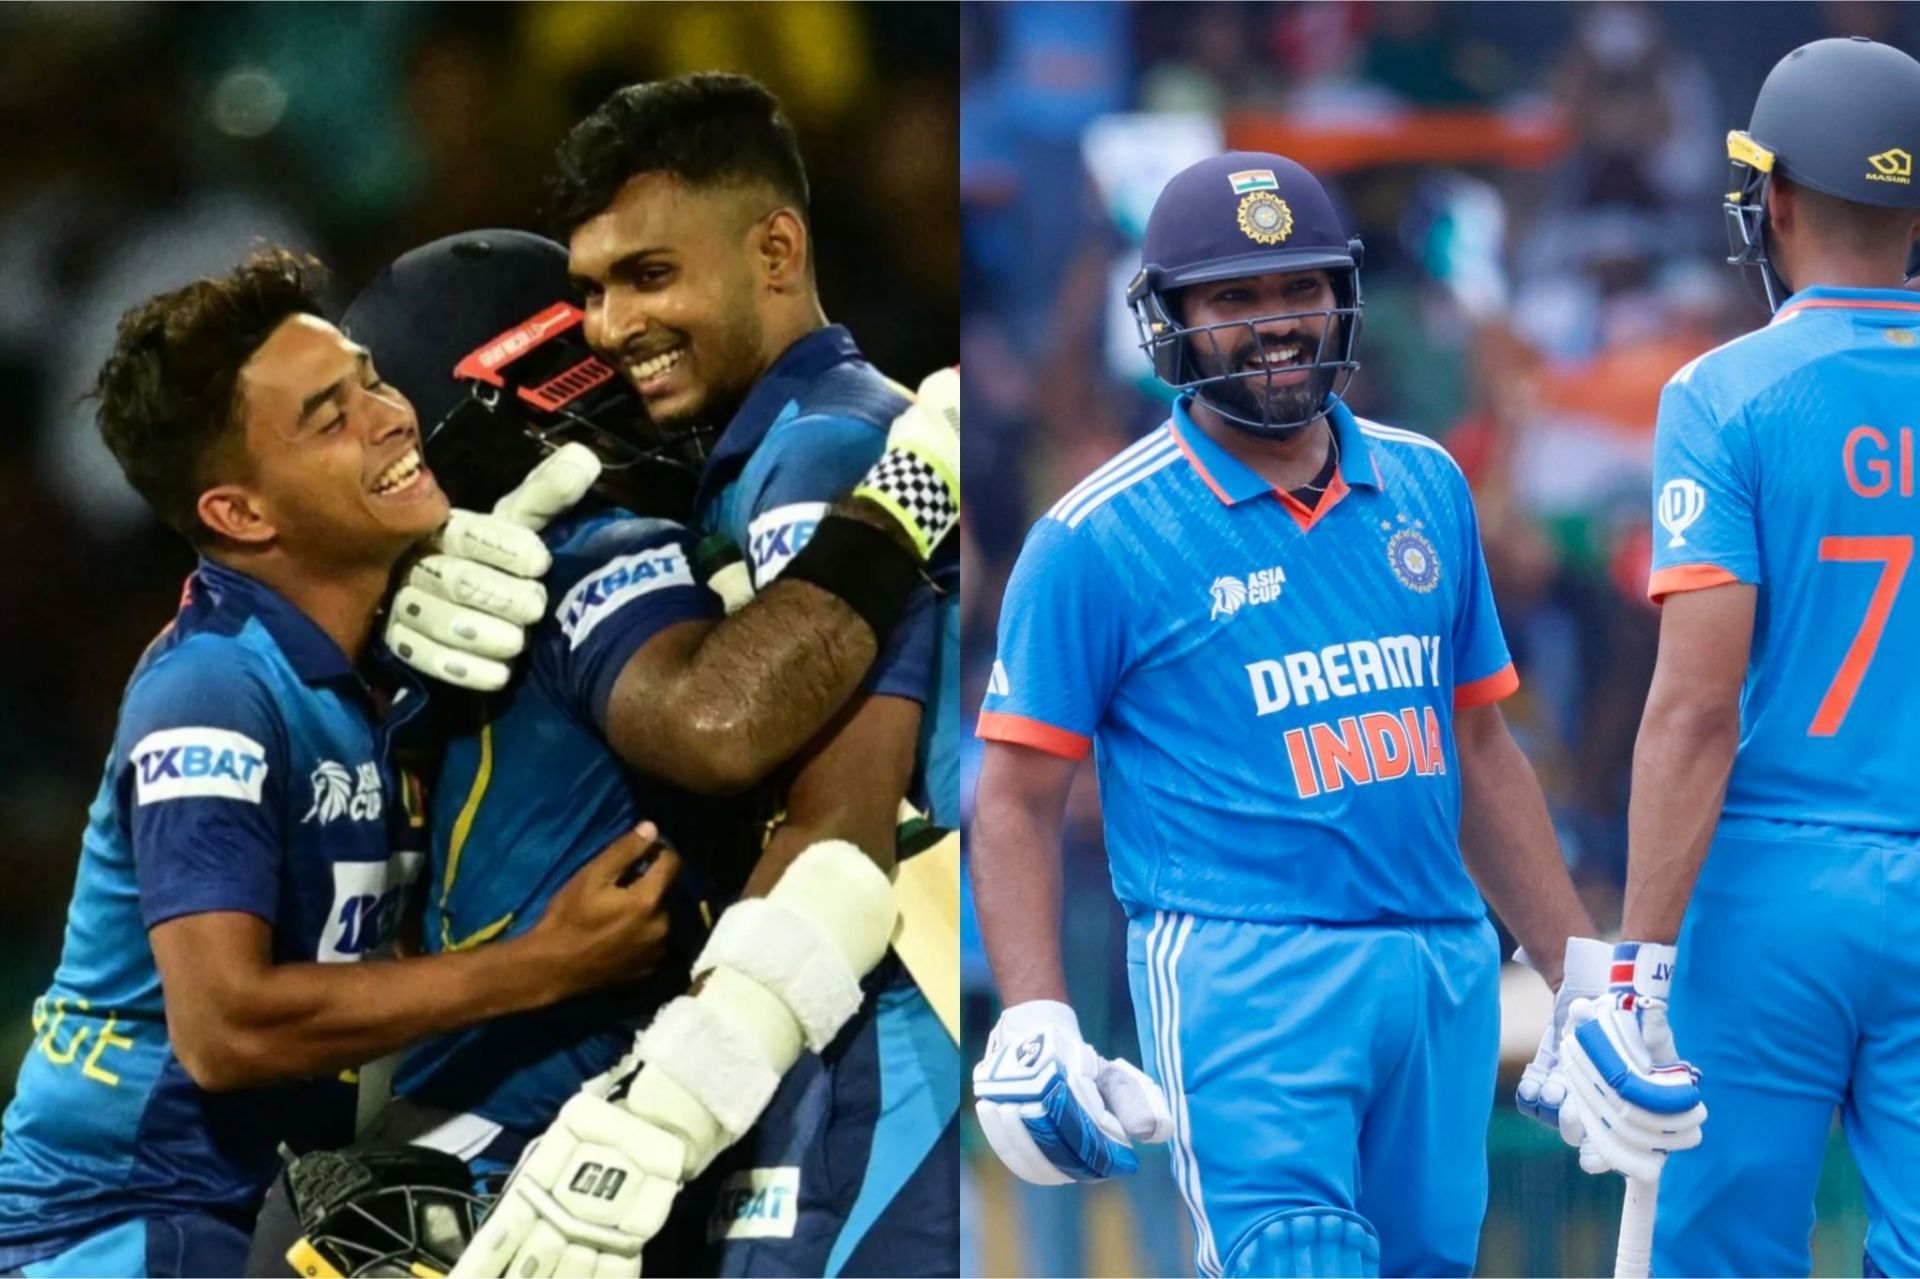 Sri Lanka have featured in 11 Asia Cup finals, while India have featured in 9 of them [Getty Images]